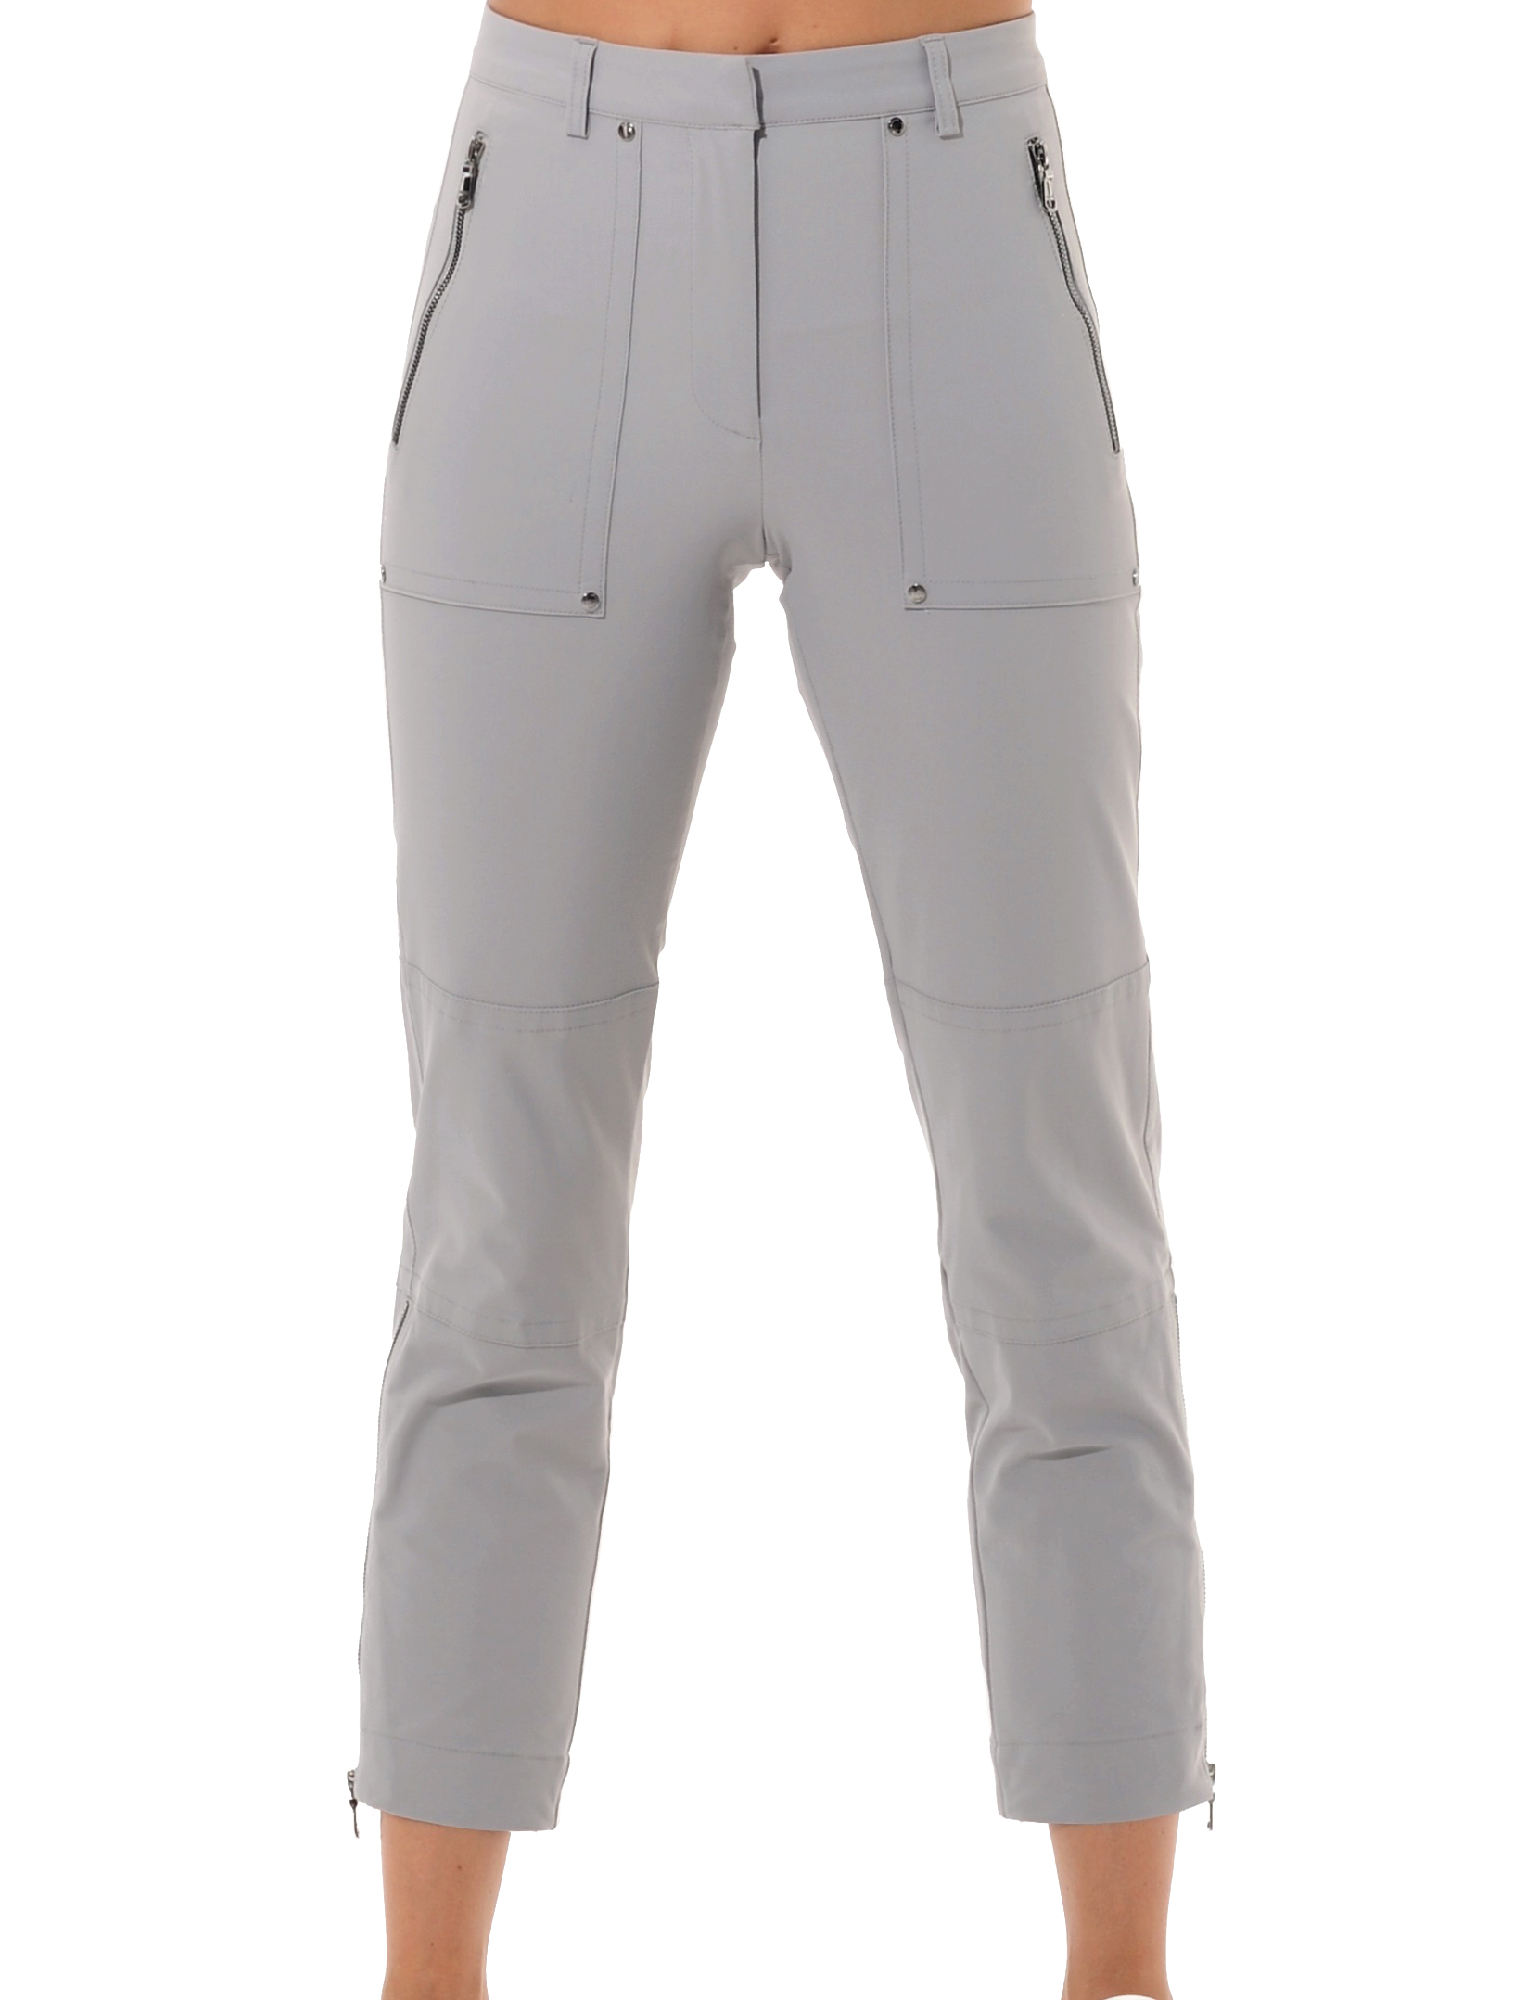 4way stretch straight fit cargo pants grey 